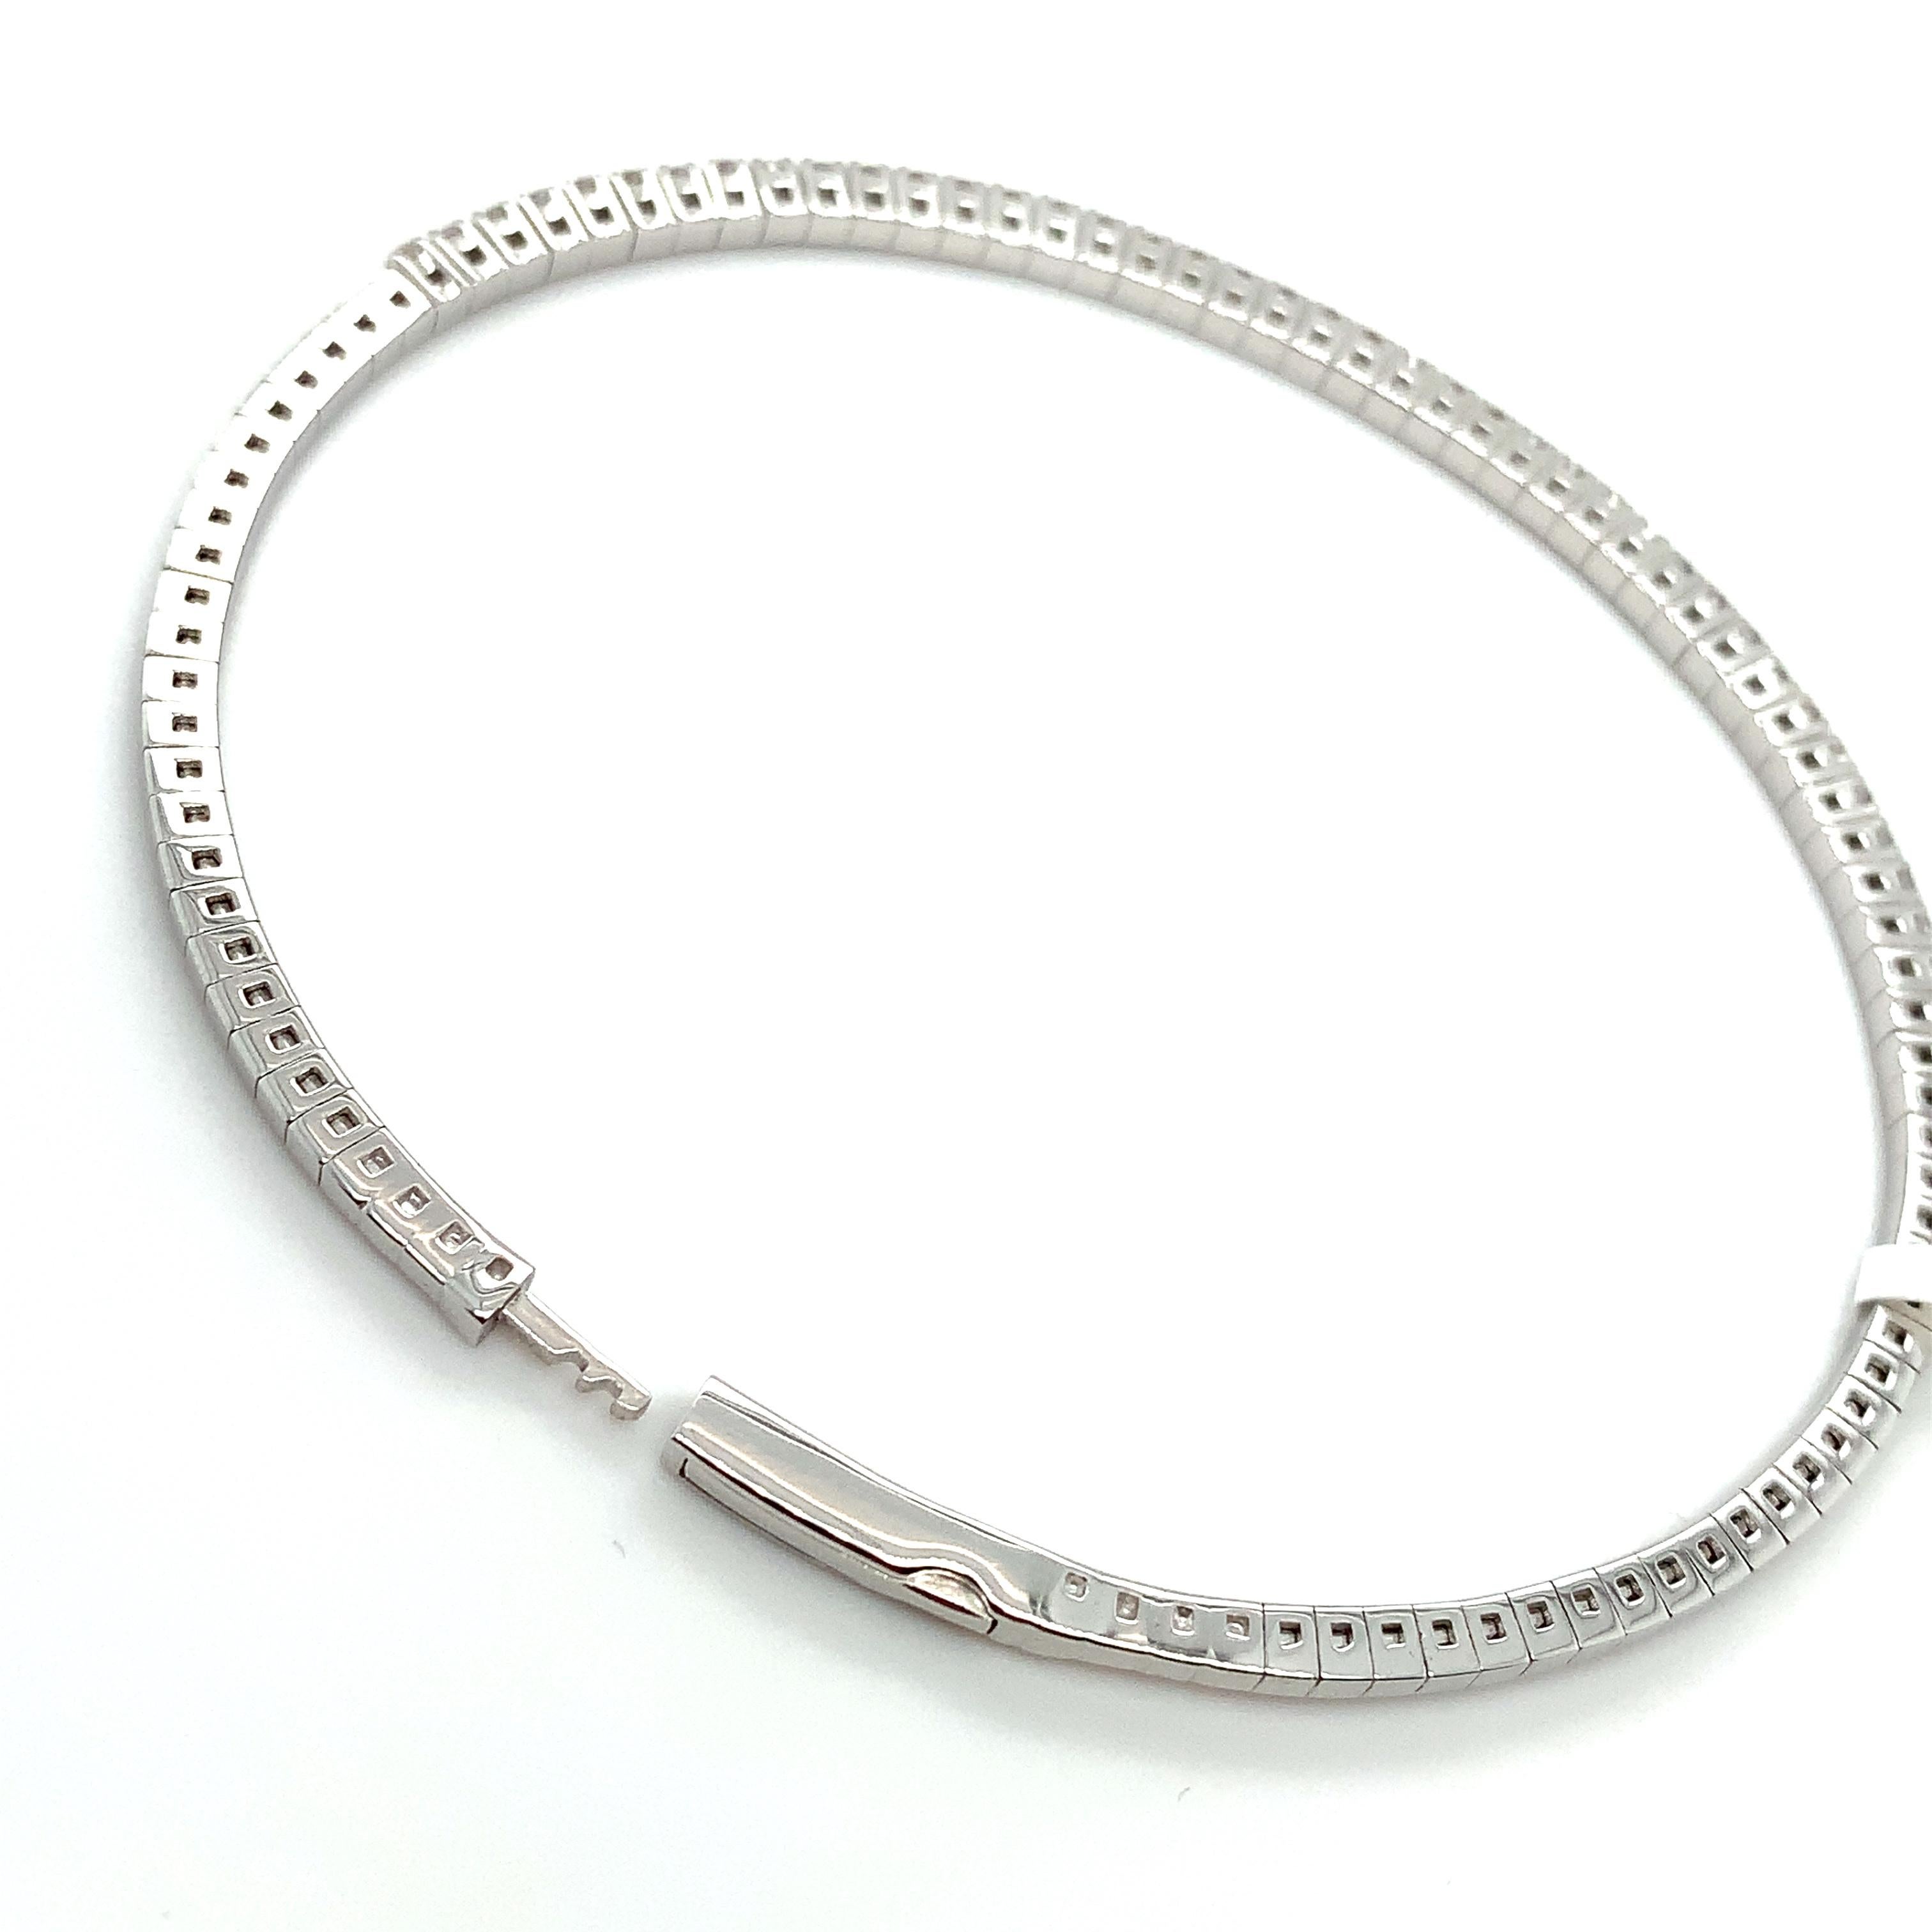 Tennis diamond bangle bracelet 18ct white gold
Composed of round brilliant diamonds total weighing 2.05ct F in colour VS1 clarity
The bracelet is hallmarked
Modern tennis diamond eternity bangle bracelet, diamond pave setting thine and fine round